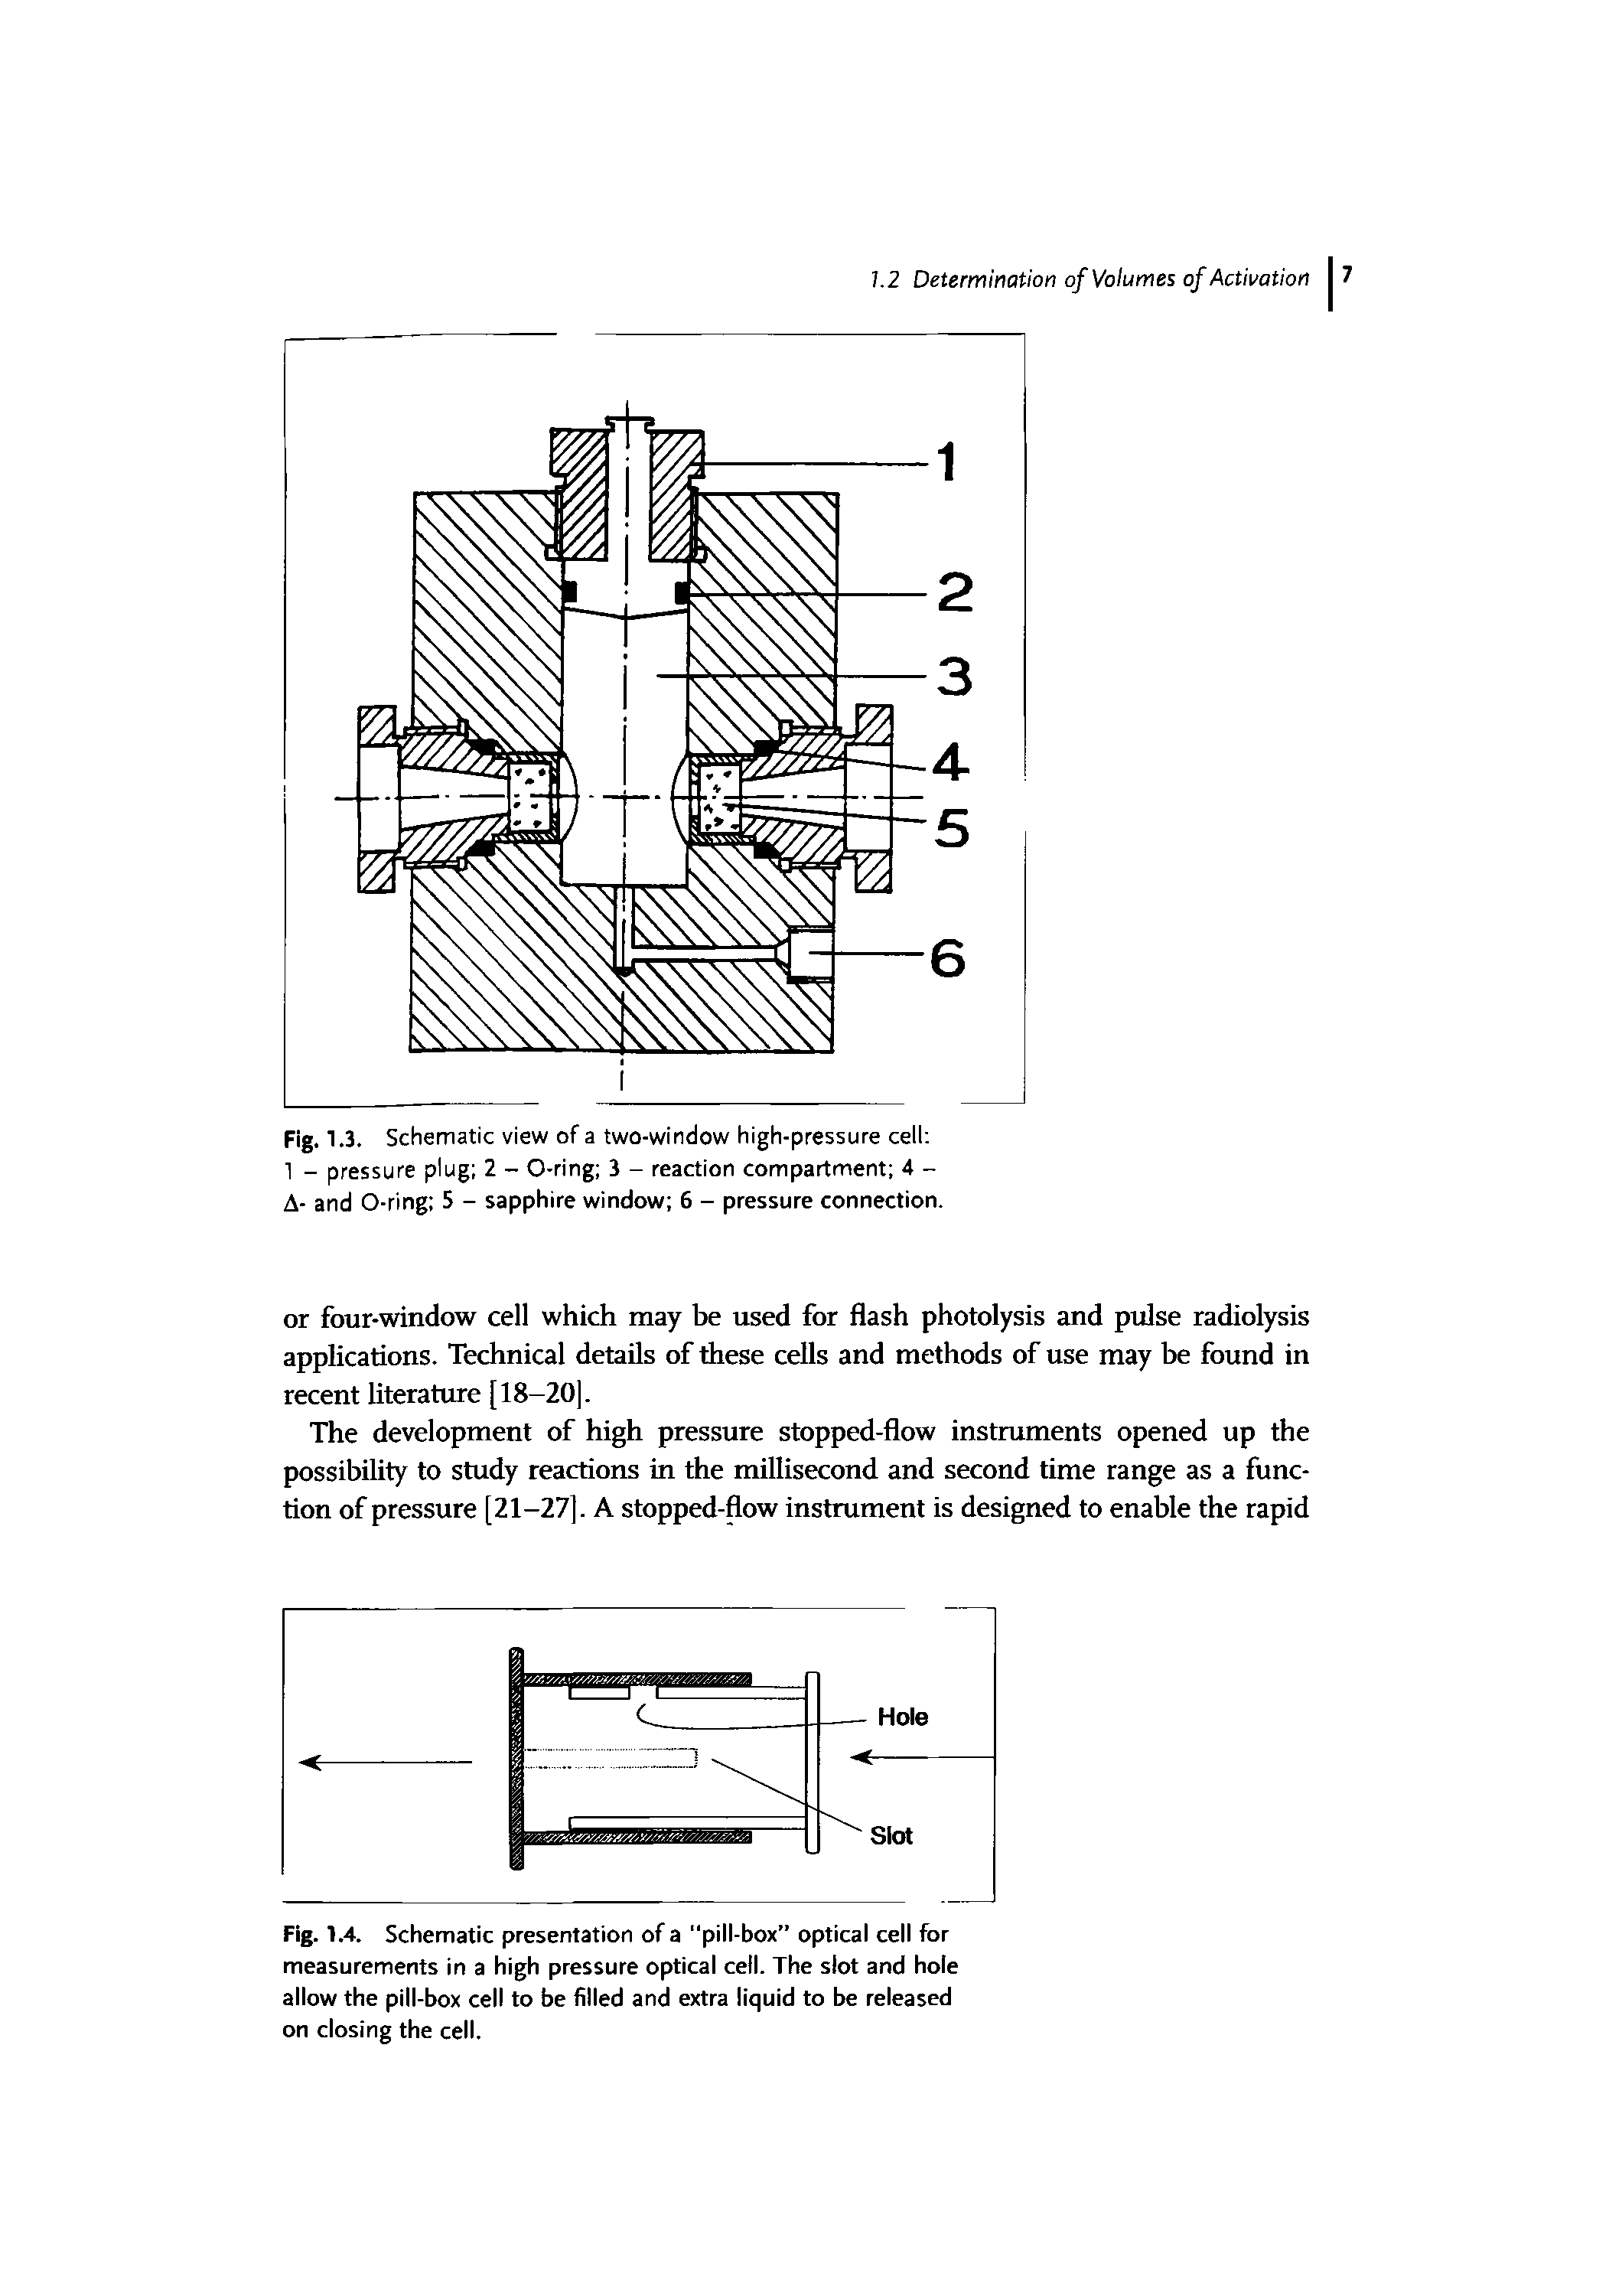 Fig. 1.4. Schematic presentation of a "pill-box optical cell for measurements in a high pressure optical cell. The slot and hole allow the pill-box cell to be filled and extra liquid to be released on closing the cell.